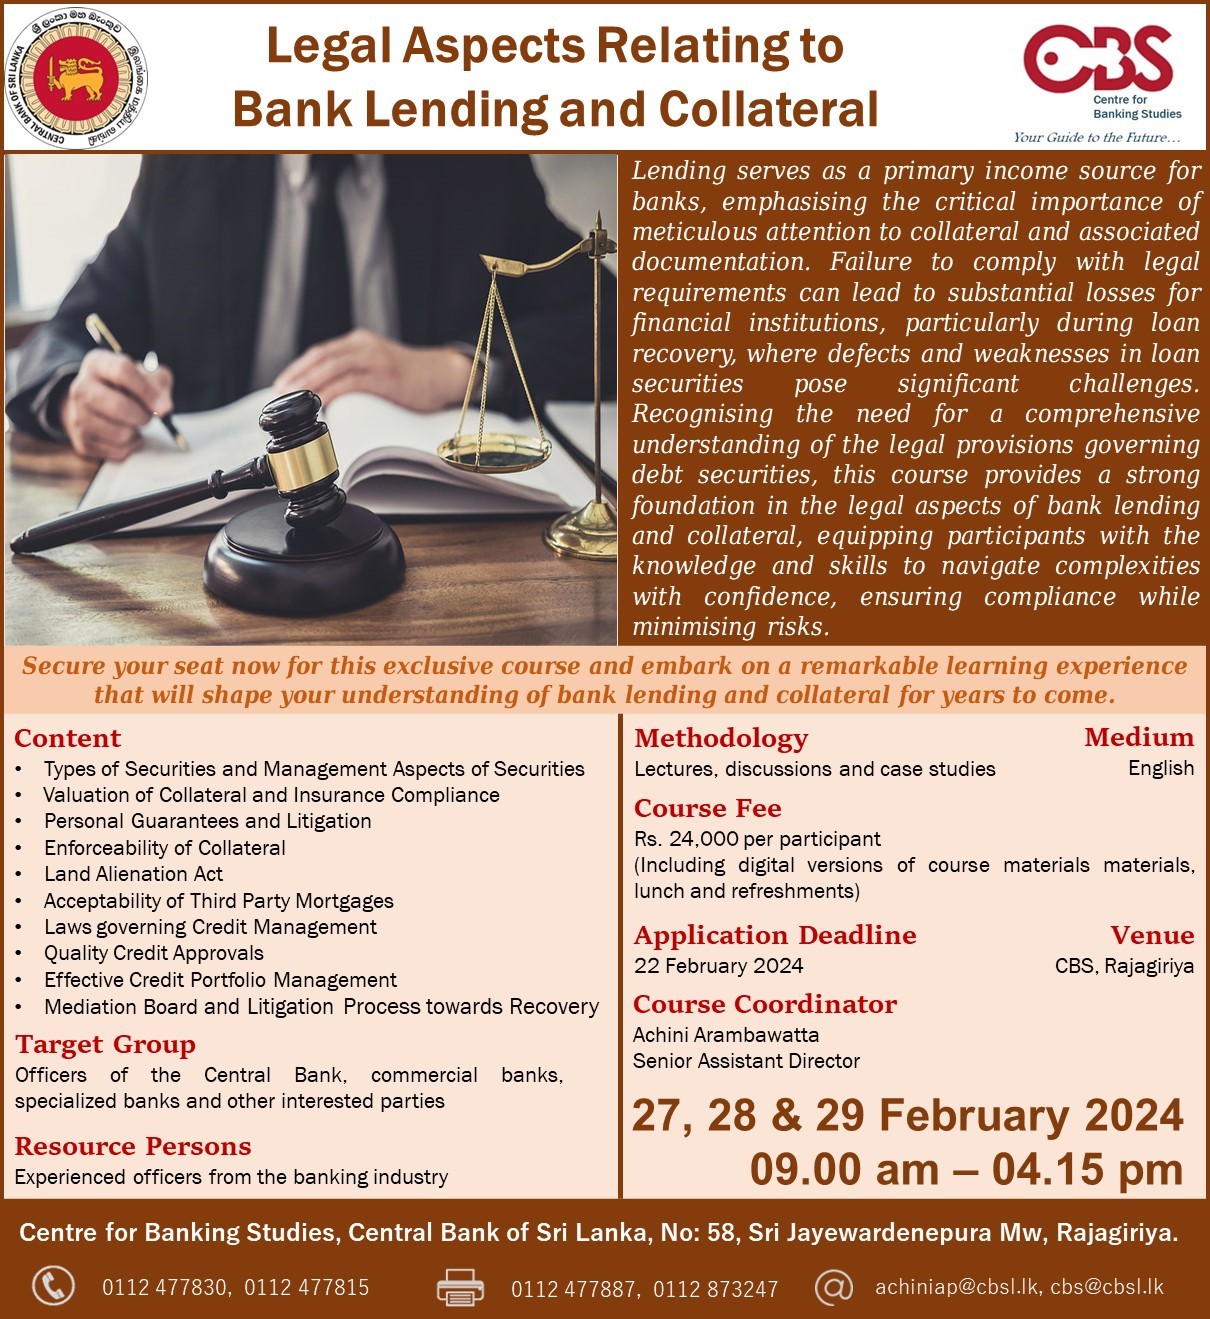 Programme on Legal Aspects Relating to Bank Lending and Collateral - 27, 28 & 29 February 2024